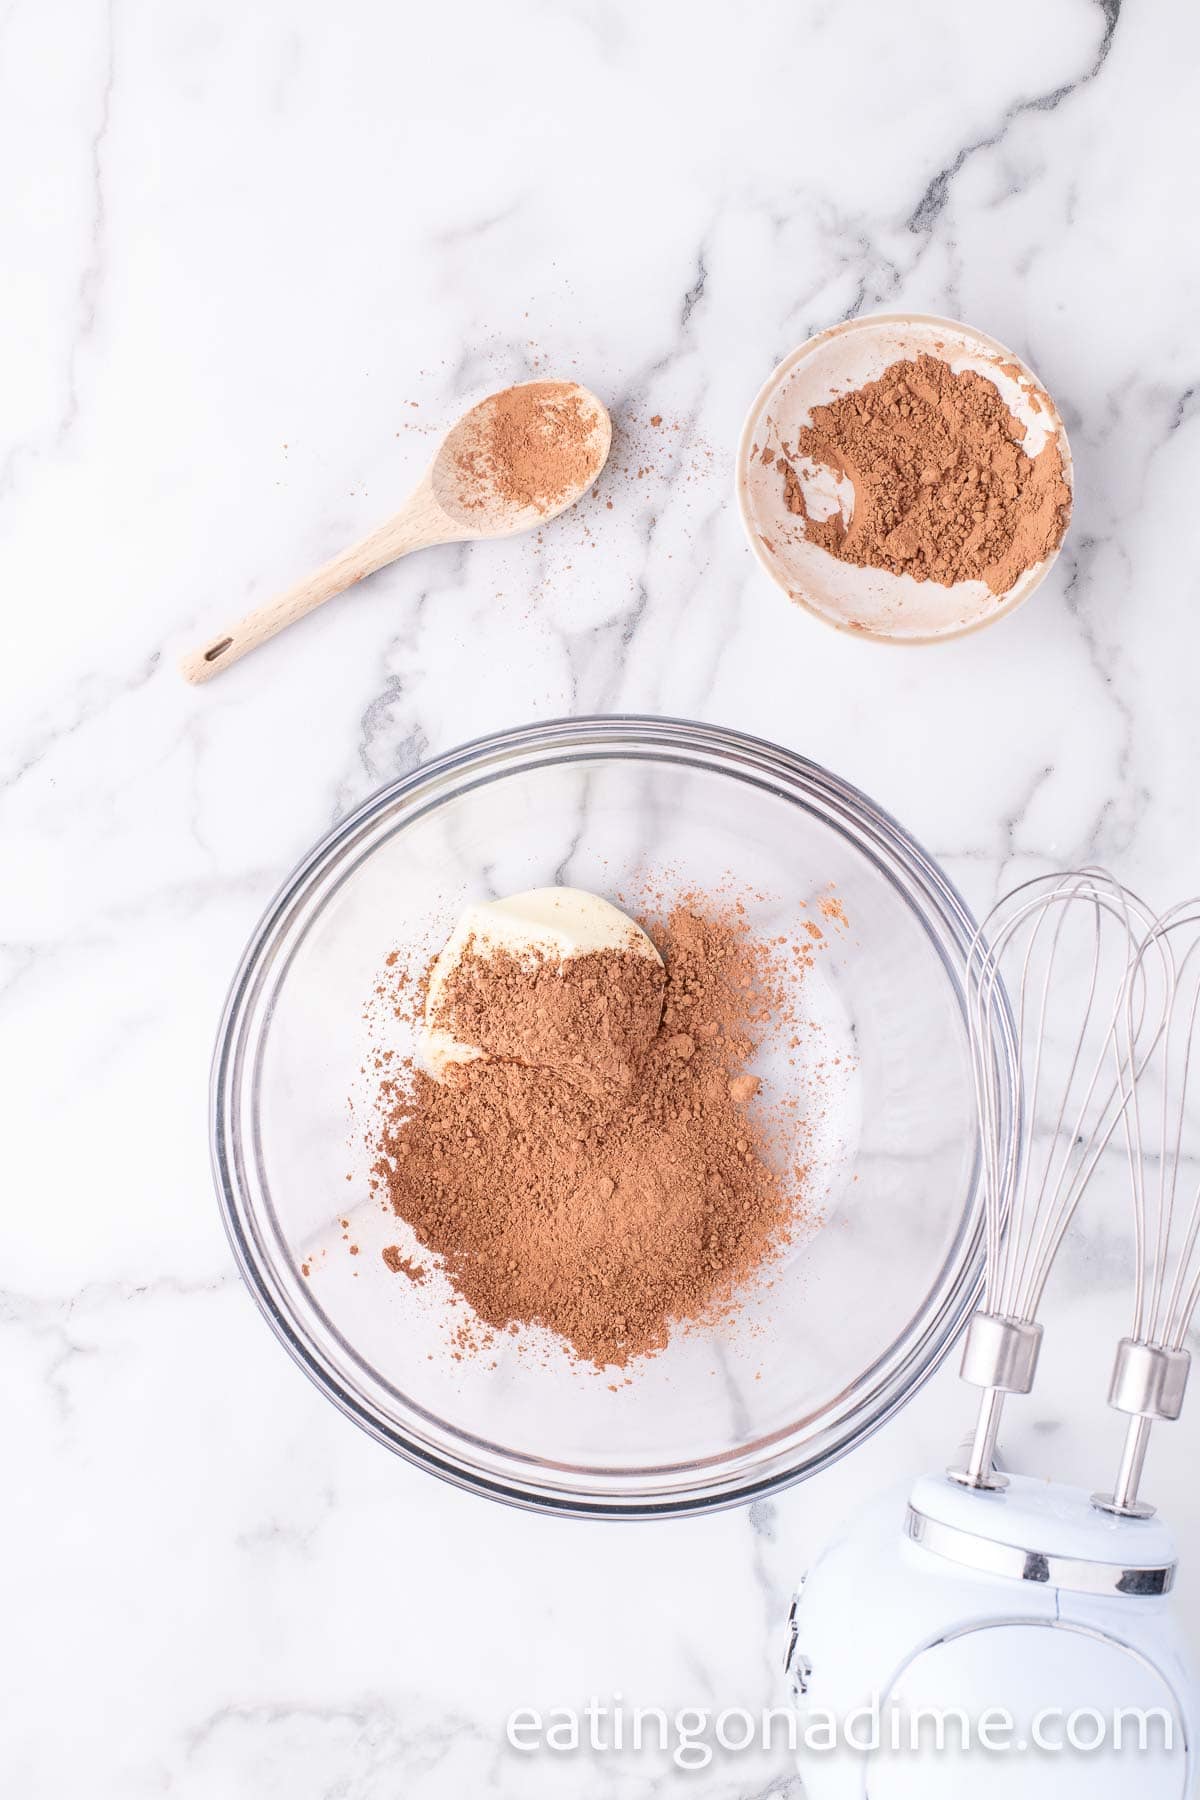 Combining the butter and cocoa powder together in a bowl